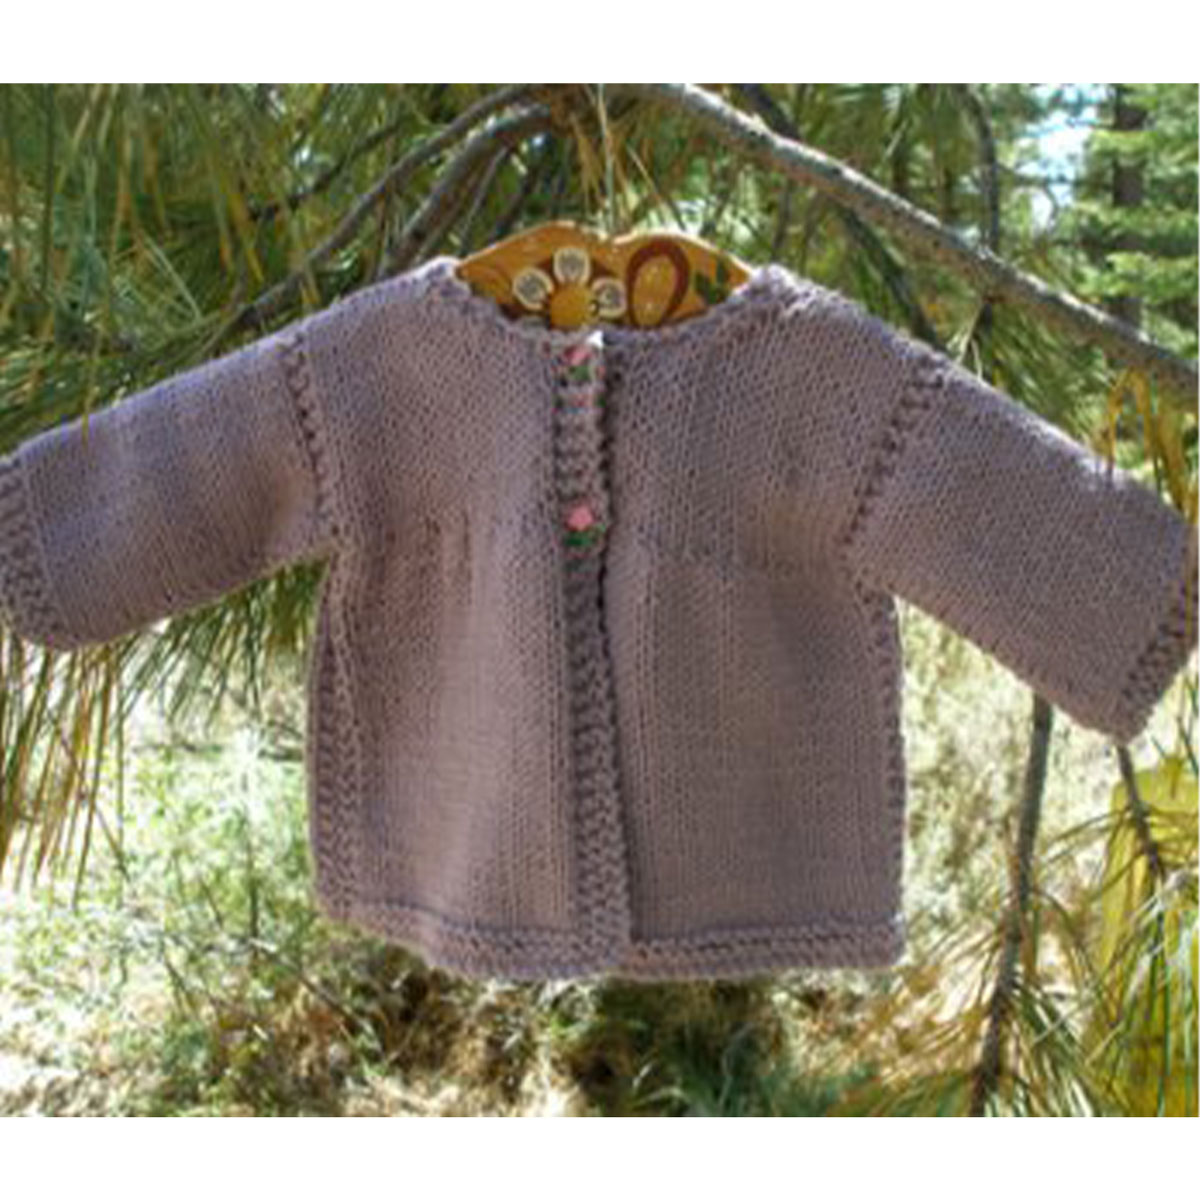 2 Knit Wits Patterns - Baby Matinee Jacket Pattern at Jimmy Beans Wool